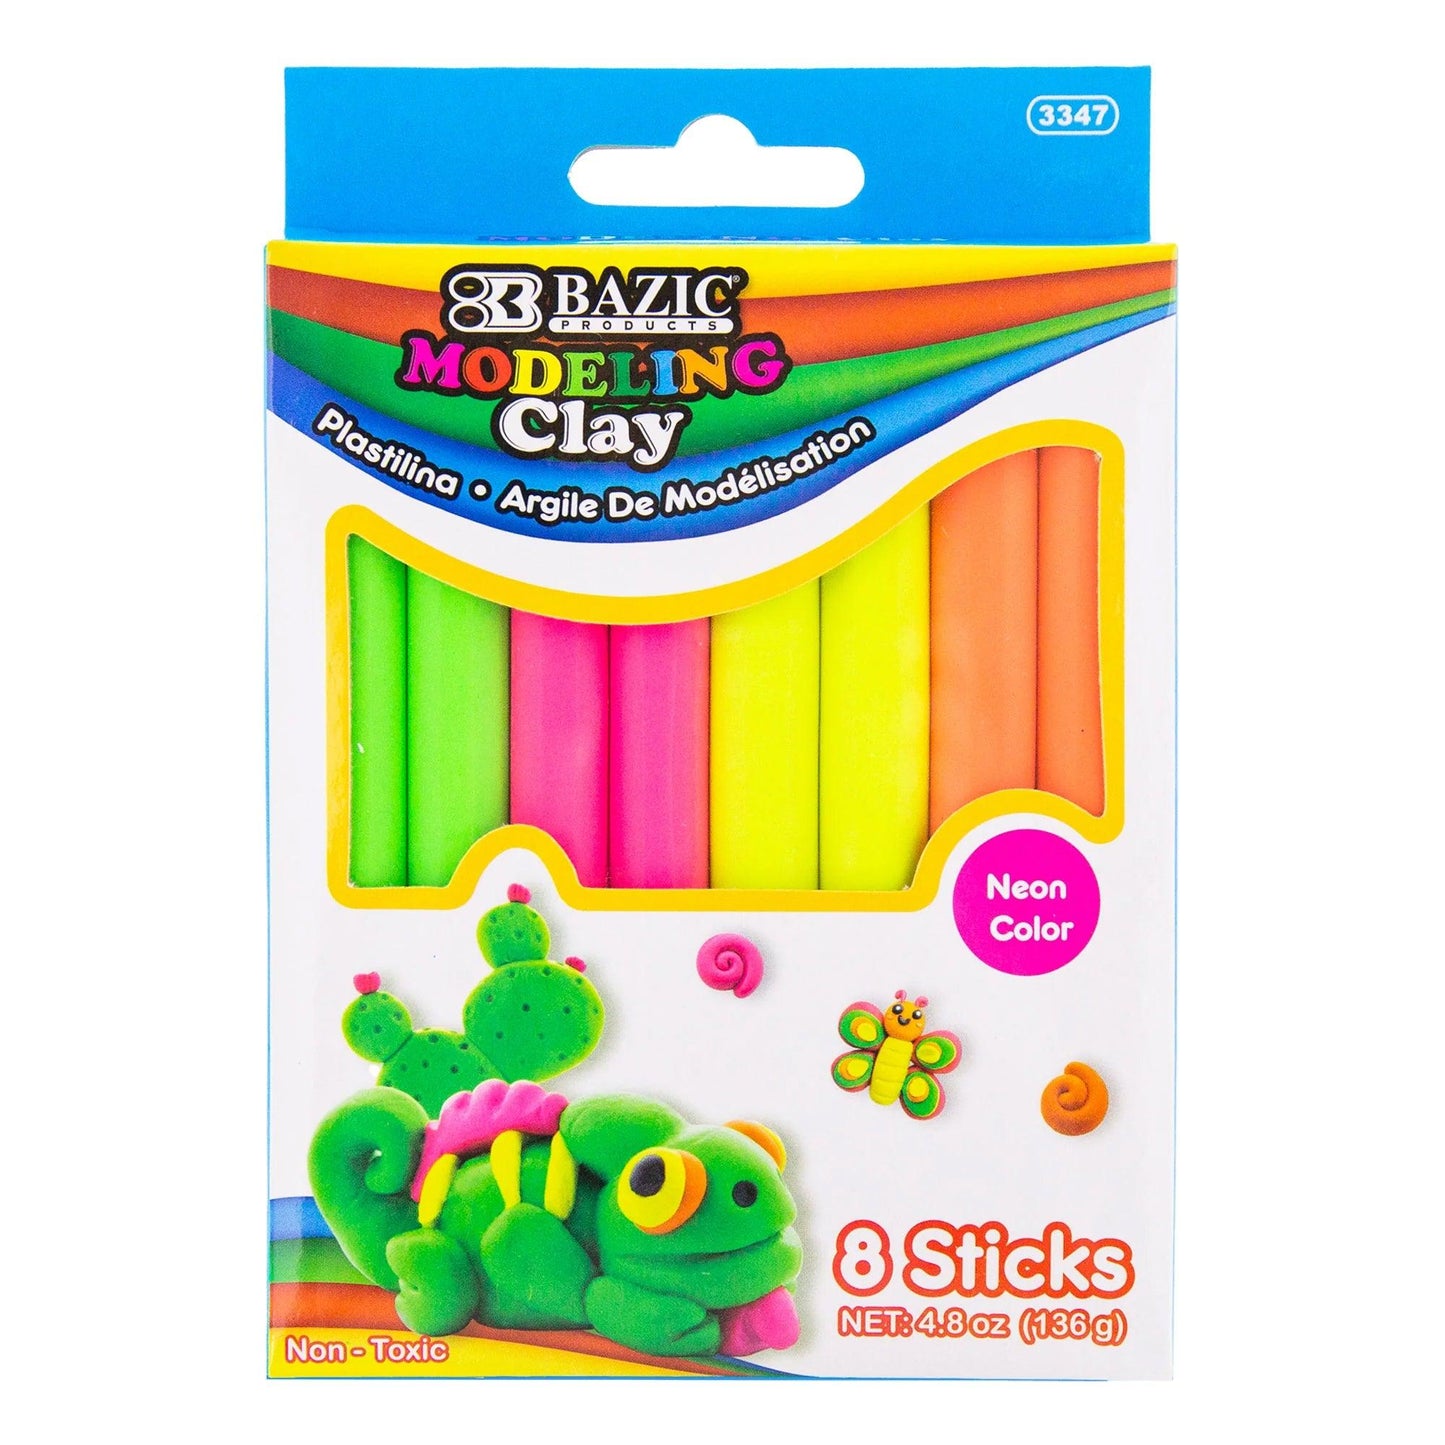 Modeling Clay Sticks, 4 Fluorescent Colors, 4.8 oz (136g) Per Pack, 24 Packs - Loomini